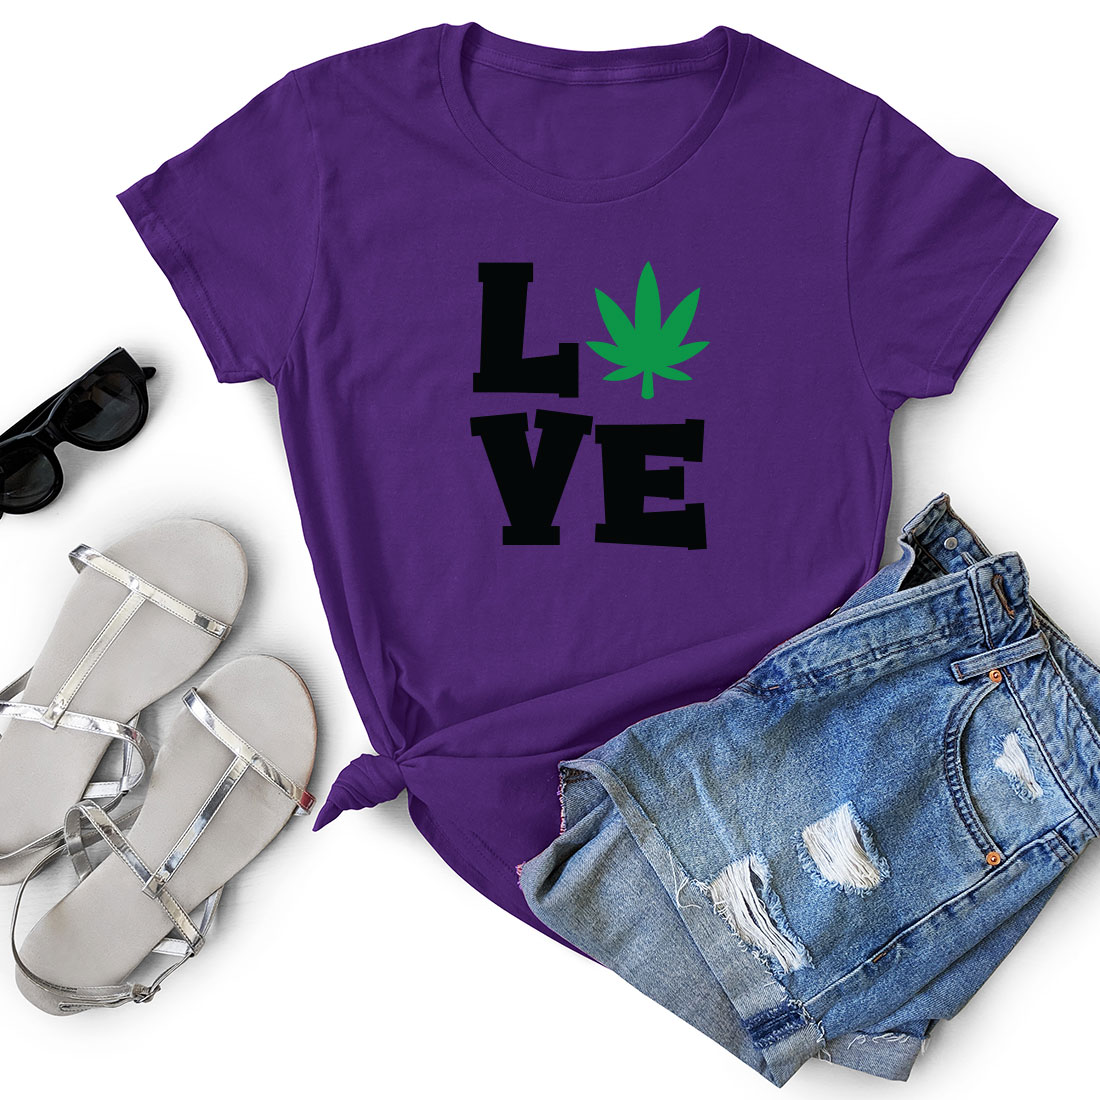 T - shirt that says love with a marijuana leaf on it.